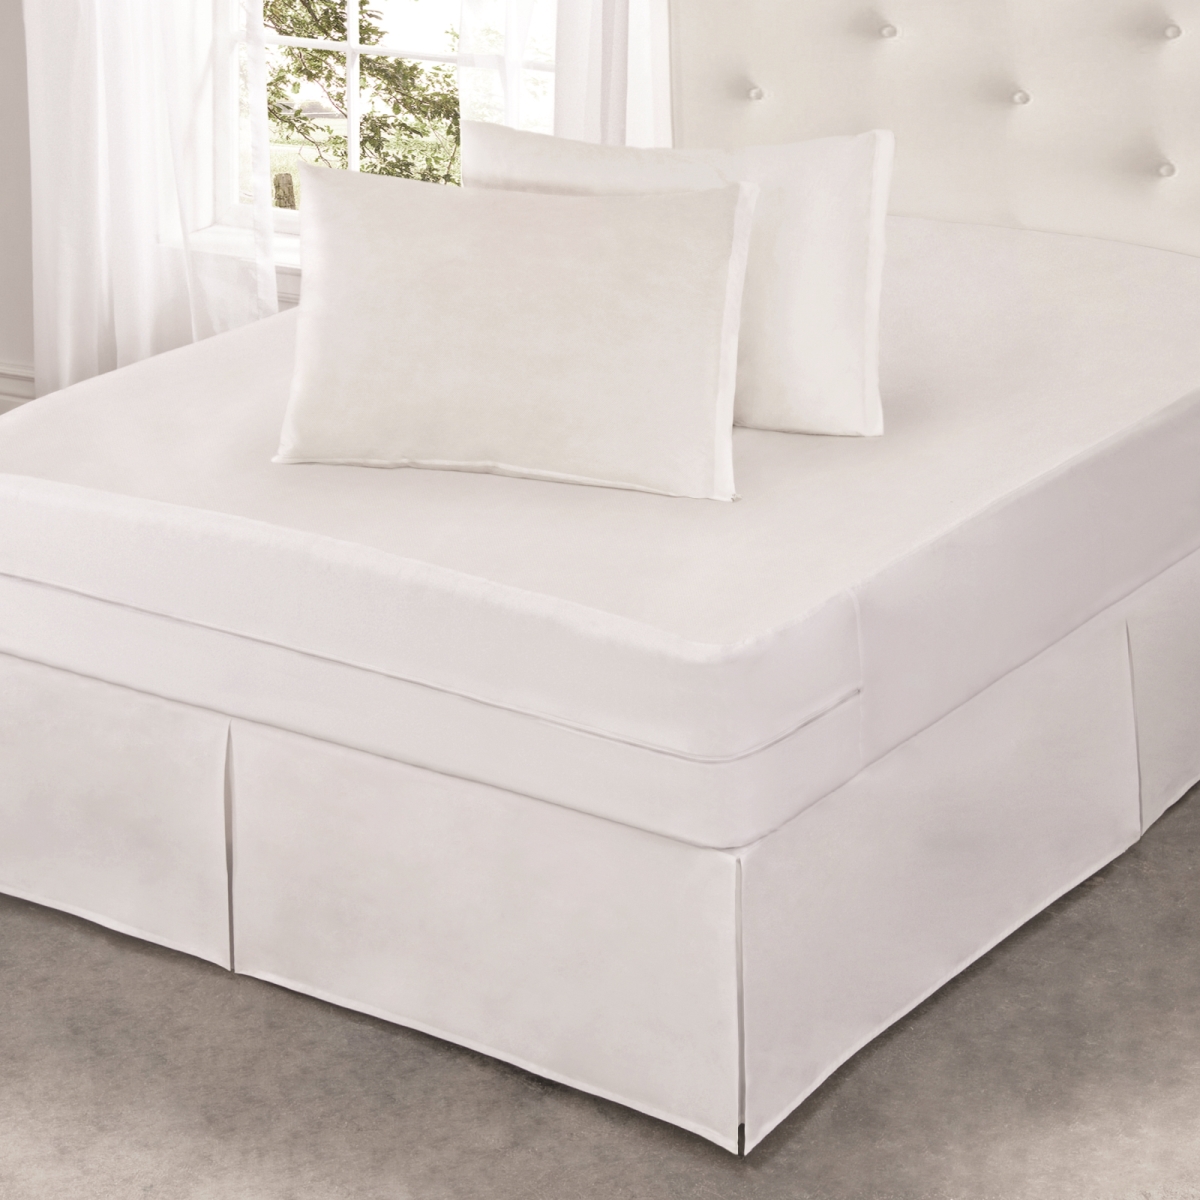 ALL172XXWHIT02 Cool Bamboo Mattress Protector with Bed Bug Blocker, White - Full Size